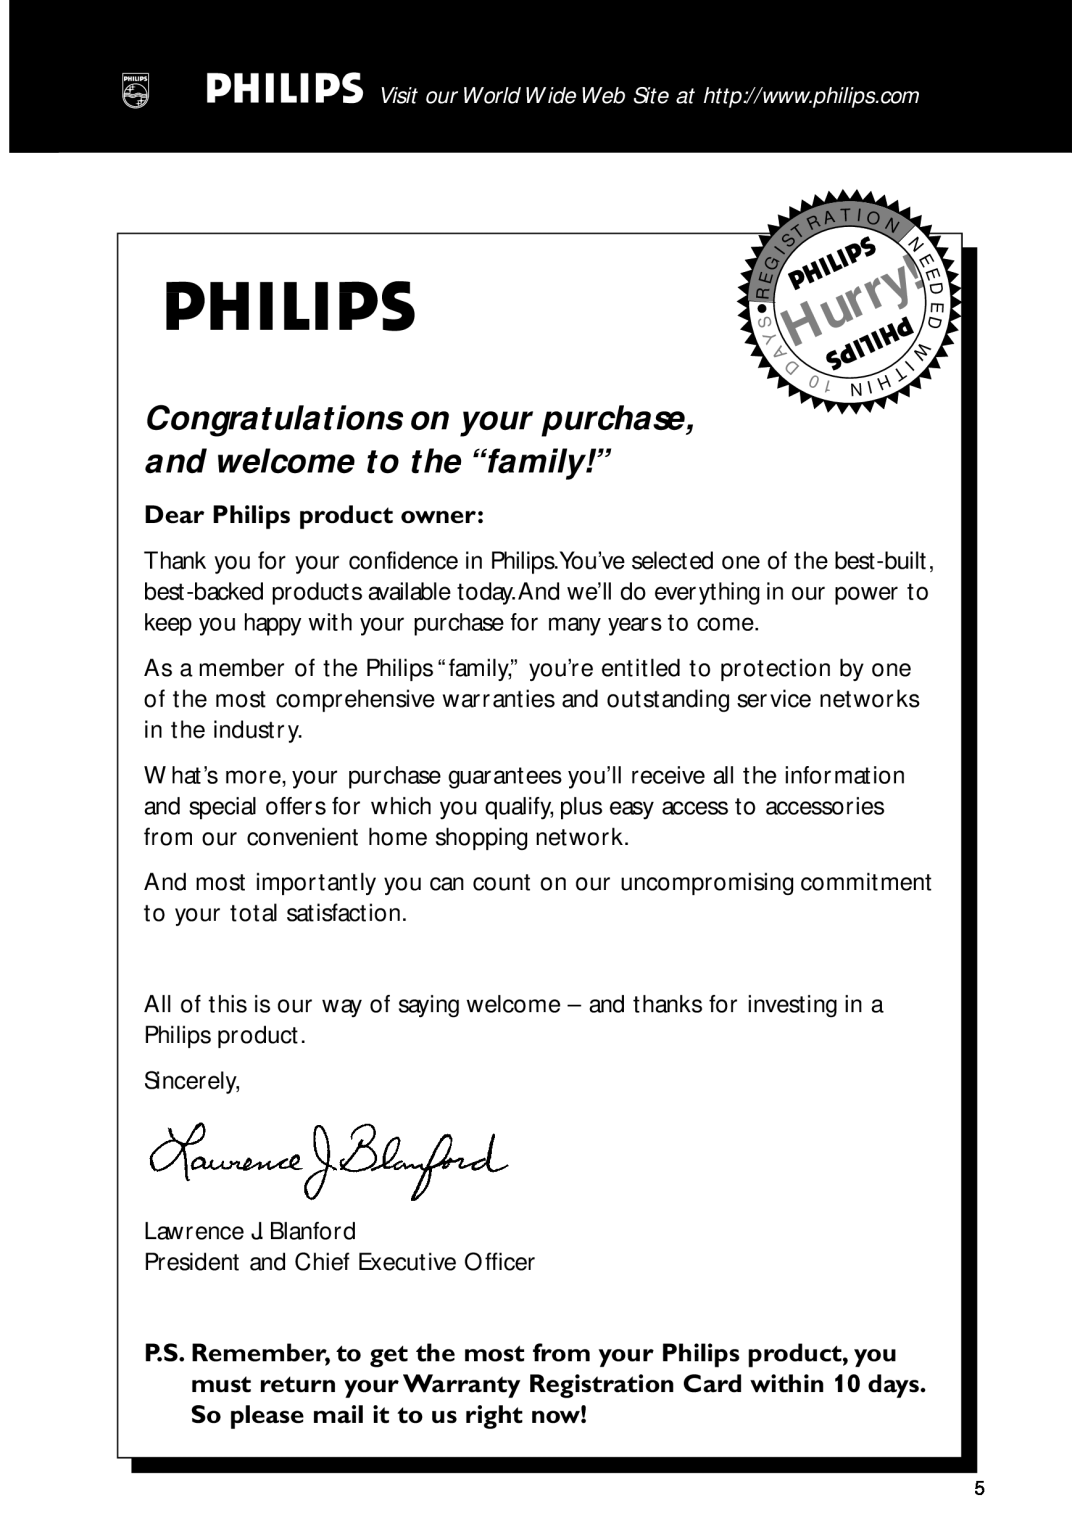 Philips MC-i250 warranty Dear Philips product owner, Hurry 